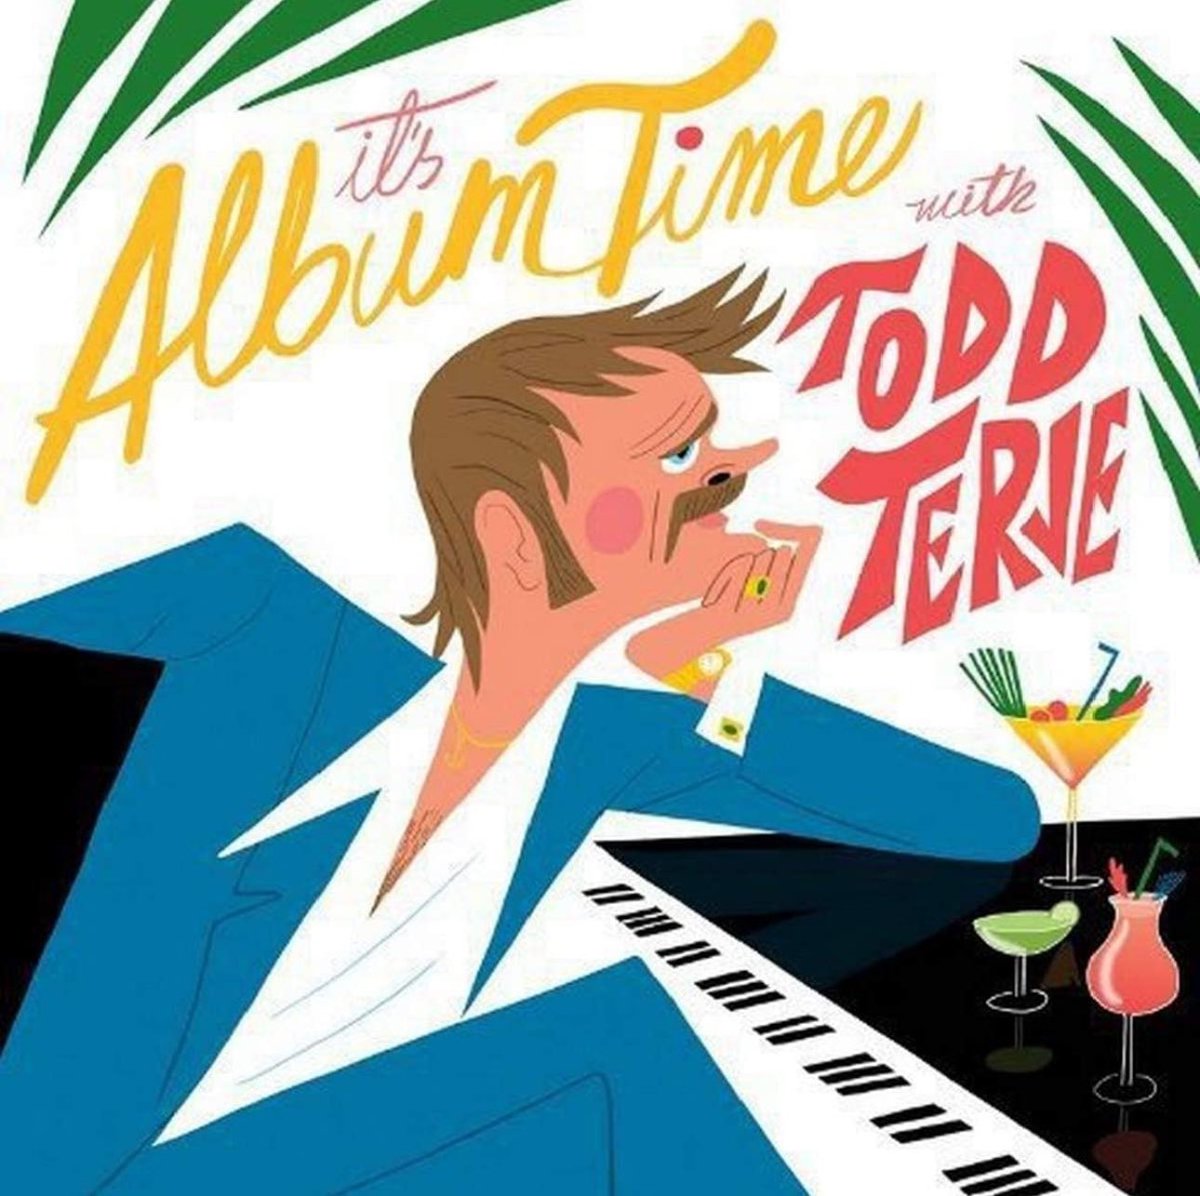 Released on this day in 2014, ‘It’s Album Time’ is the debut studio album by @toddterjeolsen. Featuring “Inspector Norse”, “Strandbar”, “Delorean Dynamite”, “Leisure Suit Preben”, “Johnny and Mary” featuring Bryan Ferry, and “Alfonso Muskedunder.” Happy 10th anniversary!